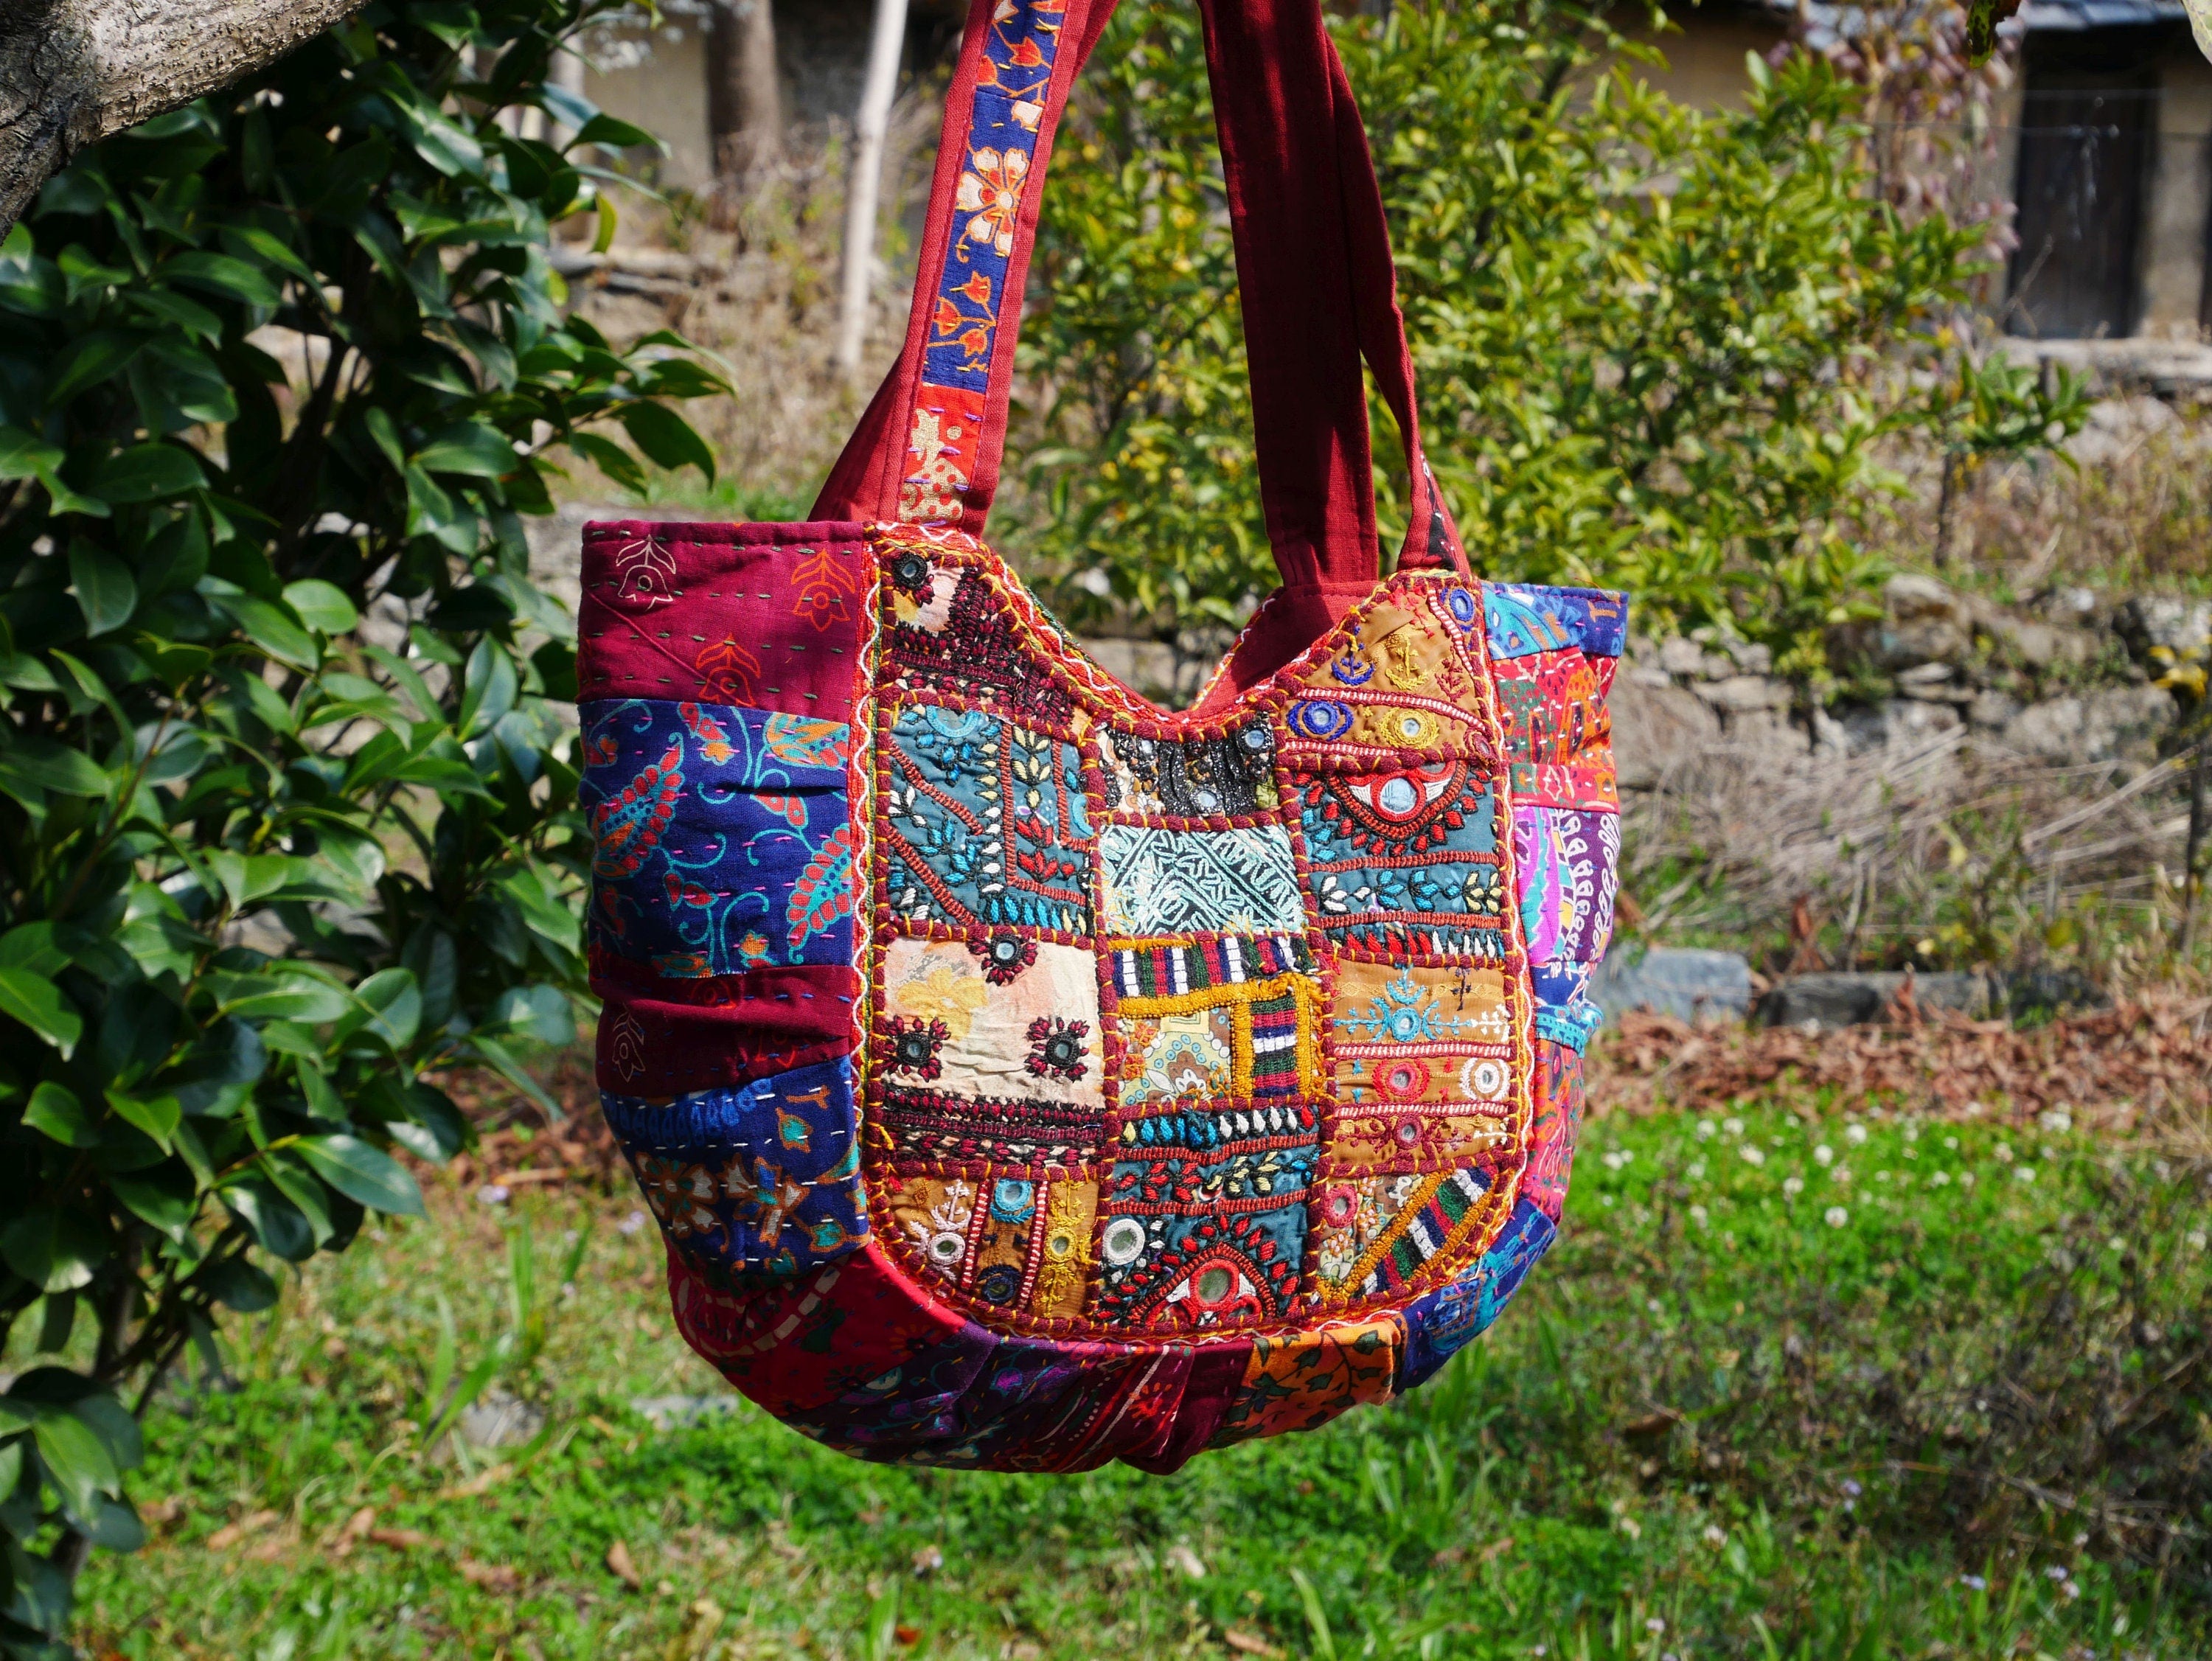 This Indian boho bag comes with intricate bead work, coin work and is the  perfect bag for a bohosoul. Shop now at our website.😍